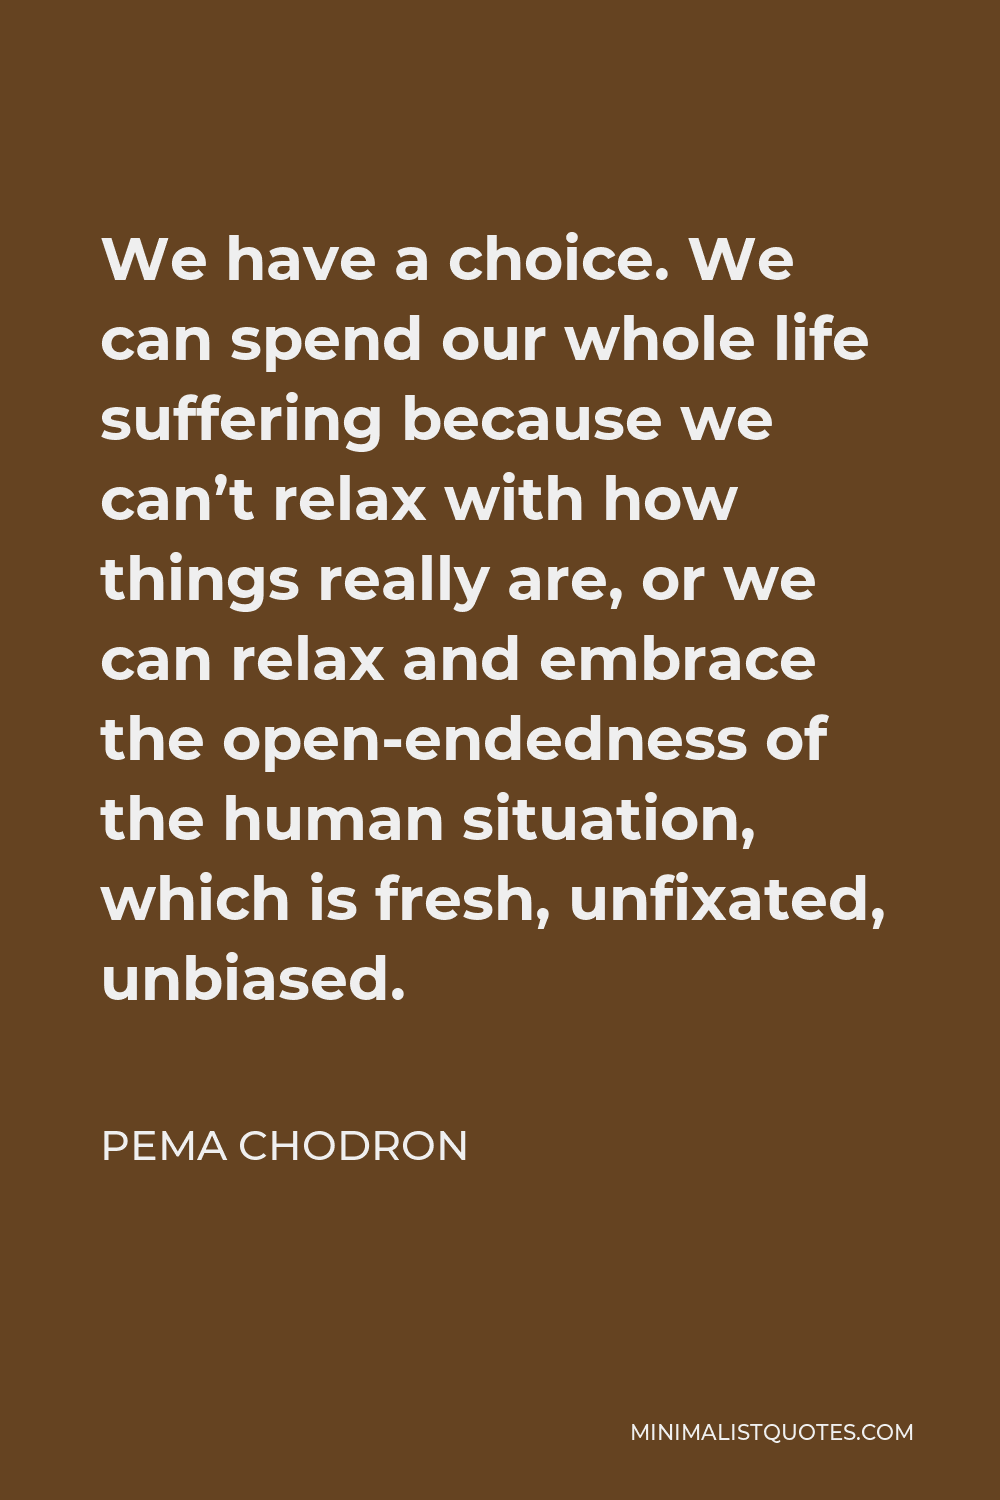 Pema Chodron Quote - We have a choice. We can spend our whole life suffering because we can’t relax with how things really are, or we can relax and embrace the open-endedness of the human situation, which is fresh, unfixated, unbiased.